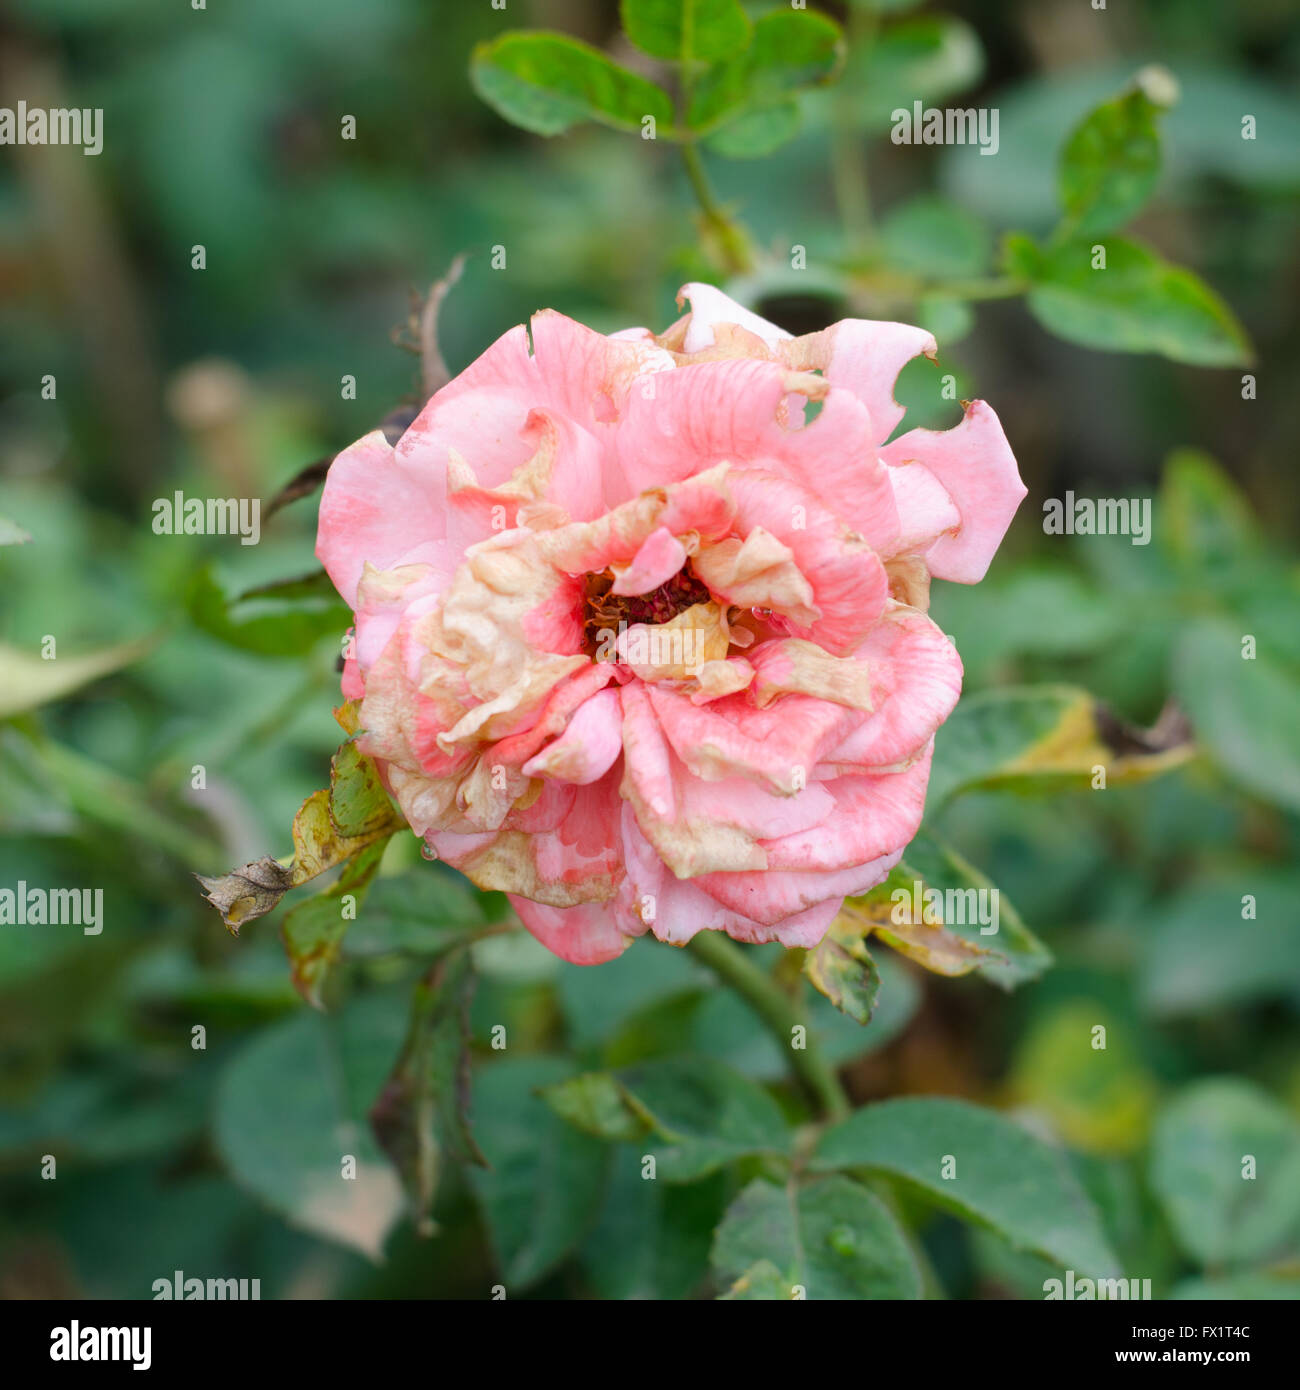 Old and withered rose on tree Stock Photo